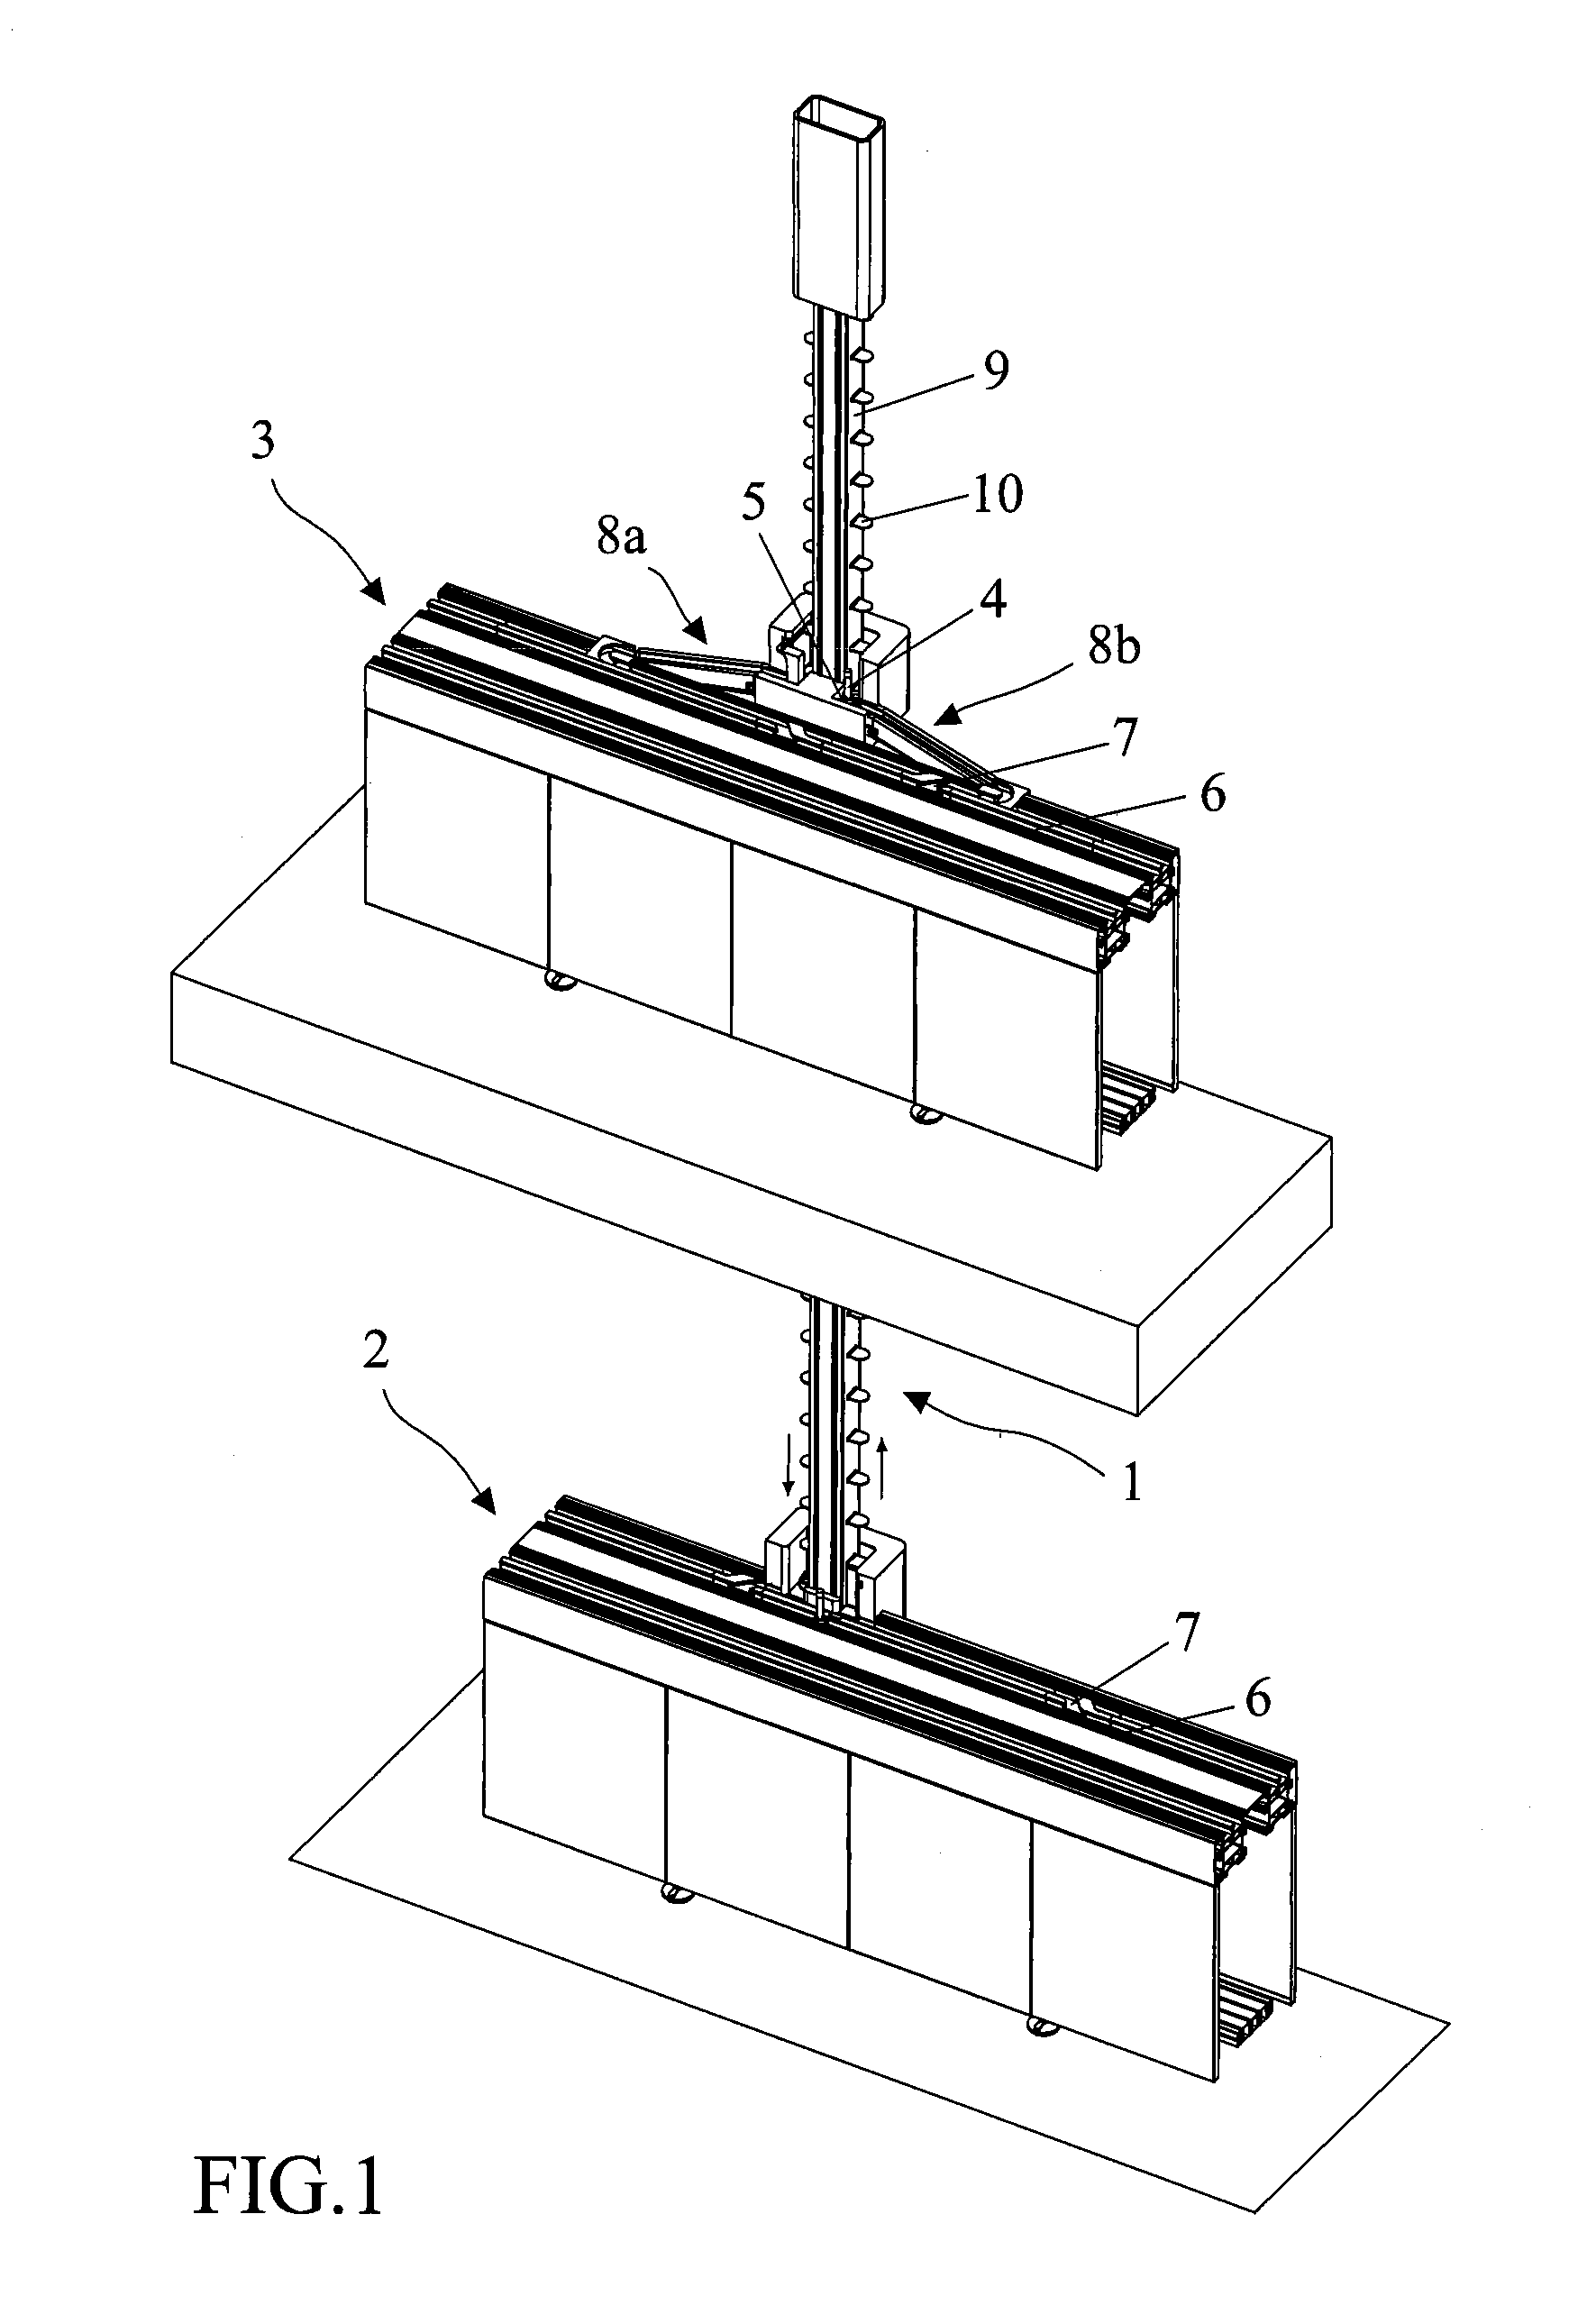 Apparatus for transferring specimens of biological material between laboratory automation systems placed at different heights